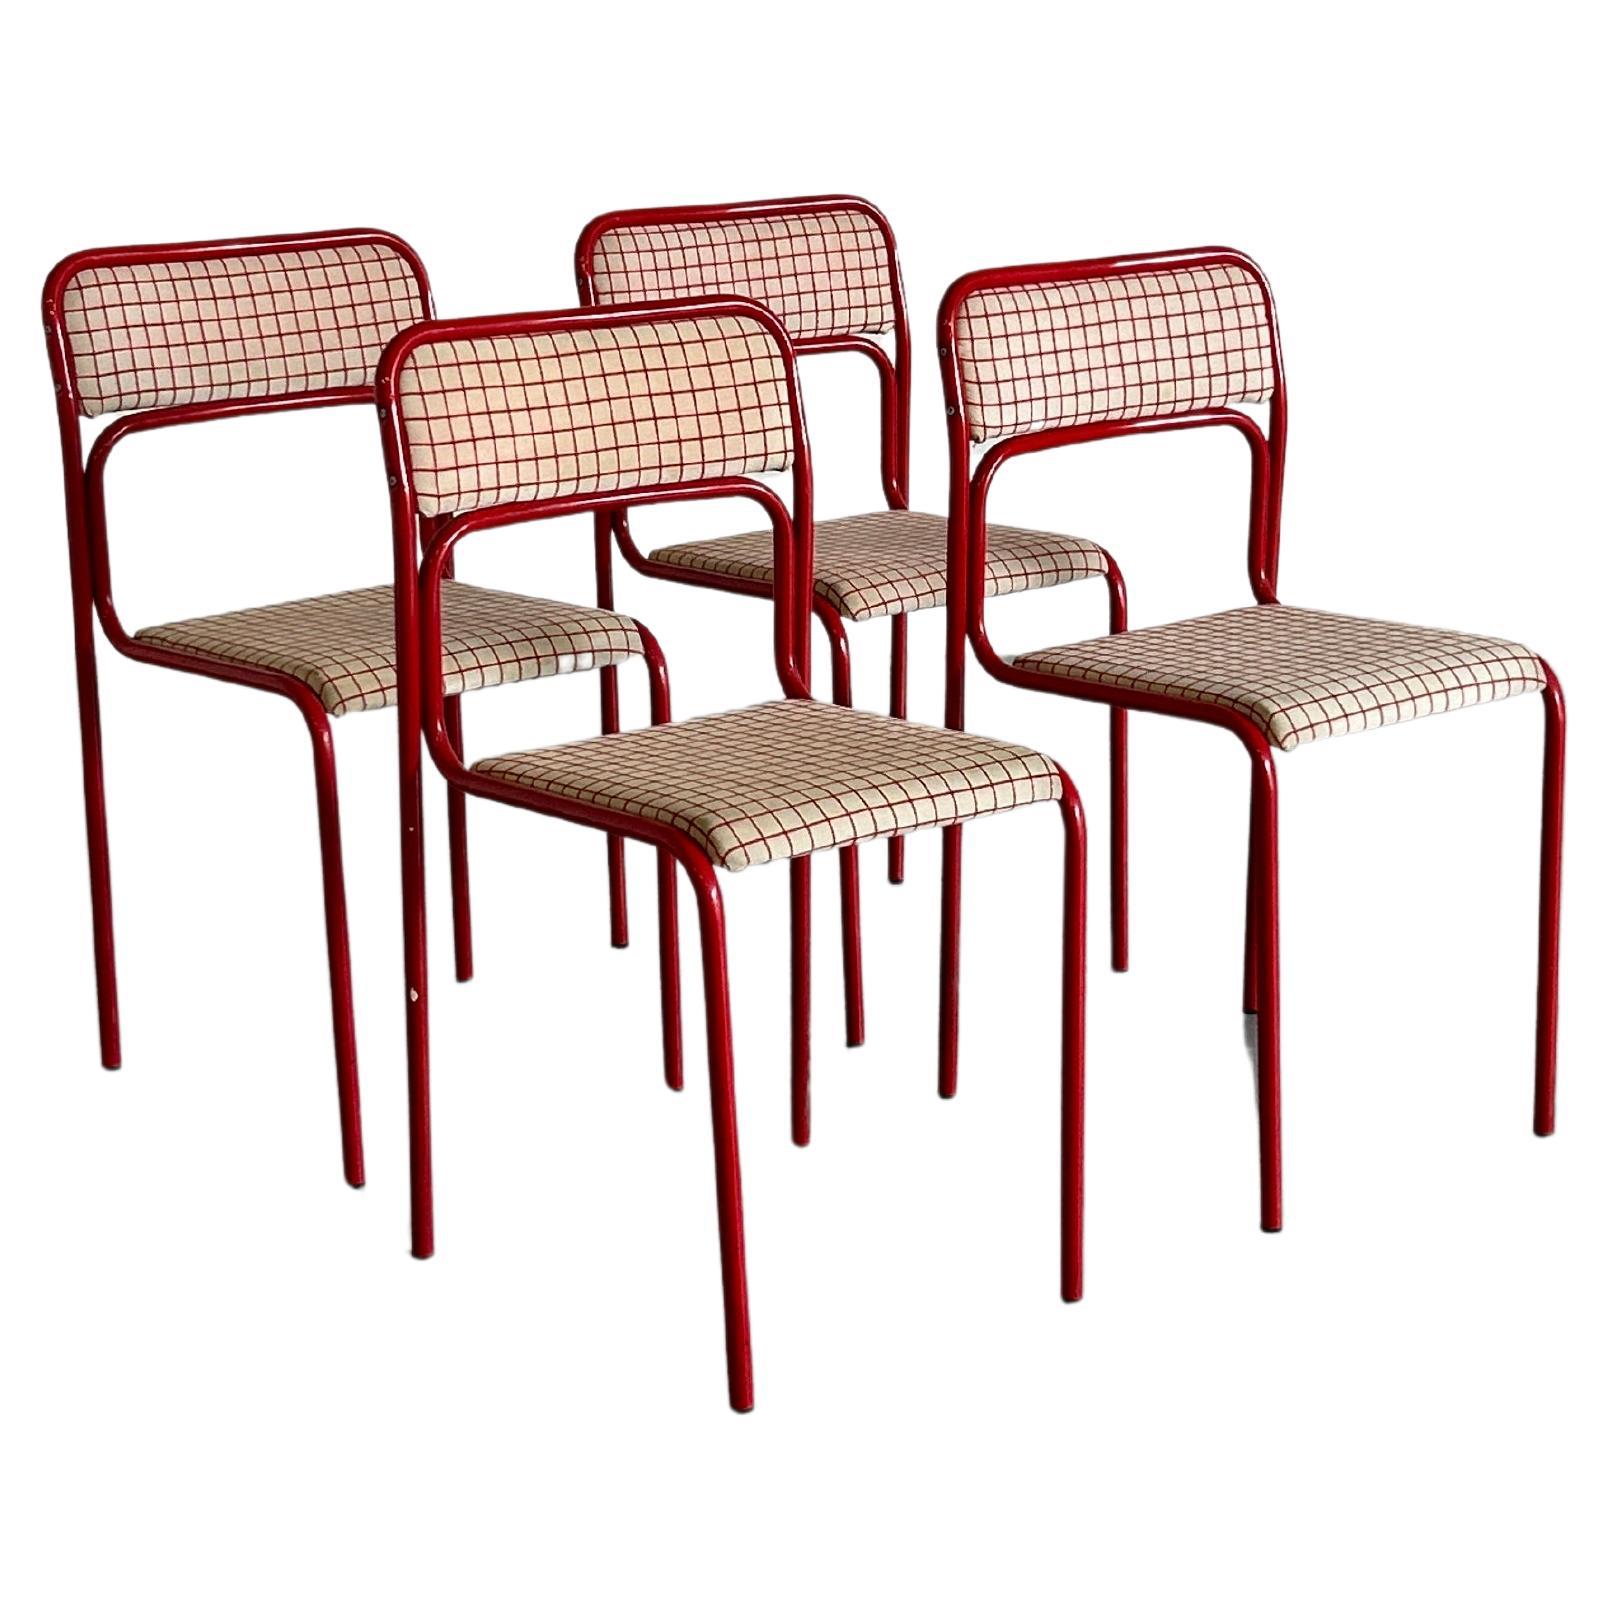 Set of 4 Pop-Art Syle Tubular Steel Checkered Red Upholstery Chairs, 80s Italy